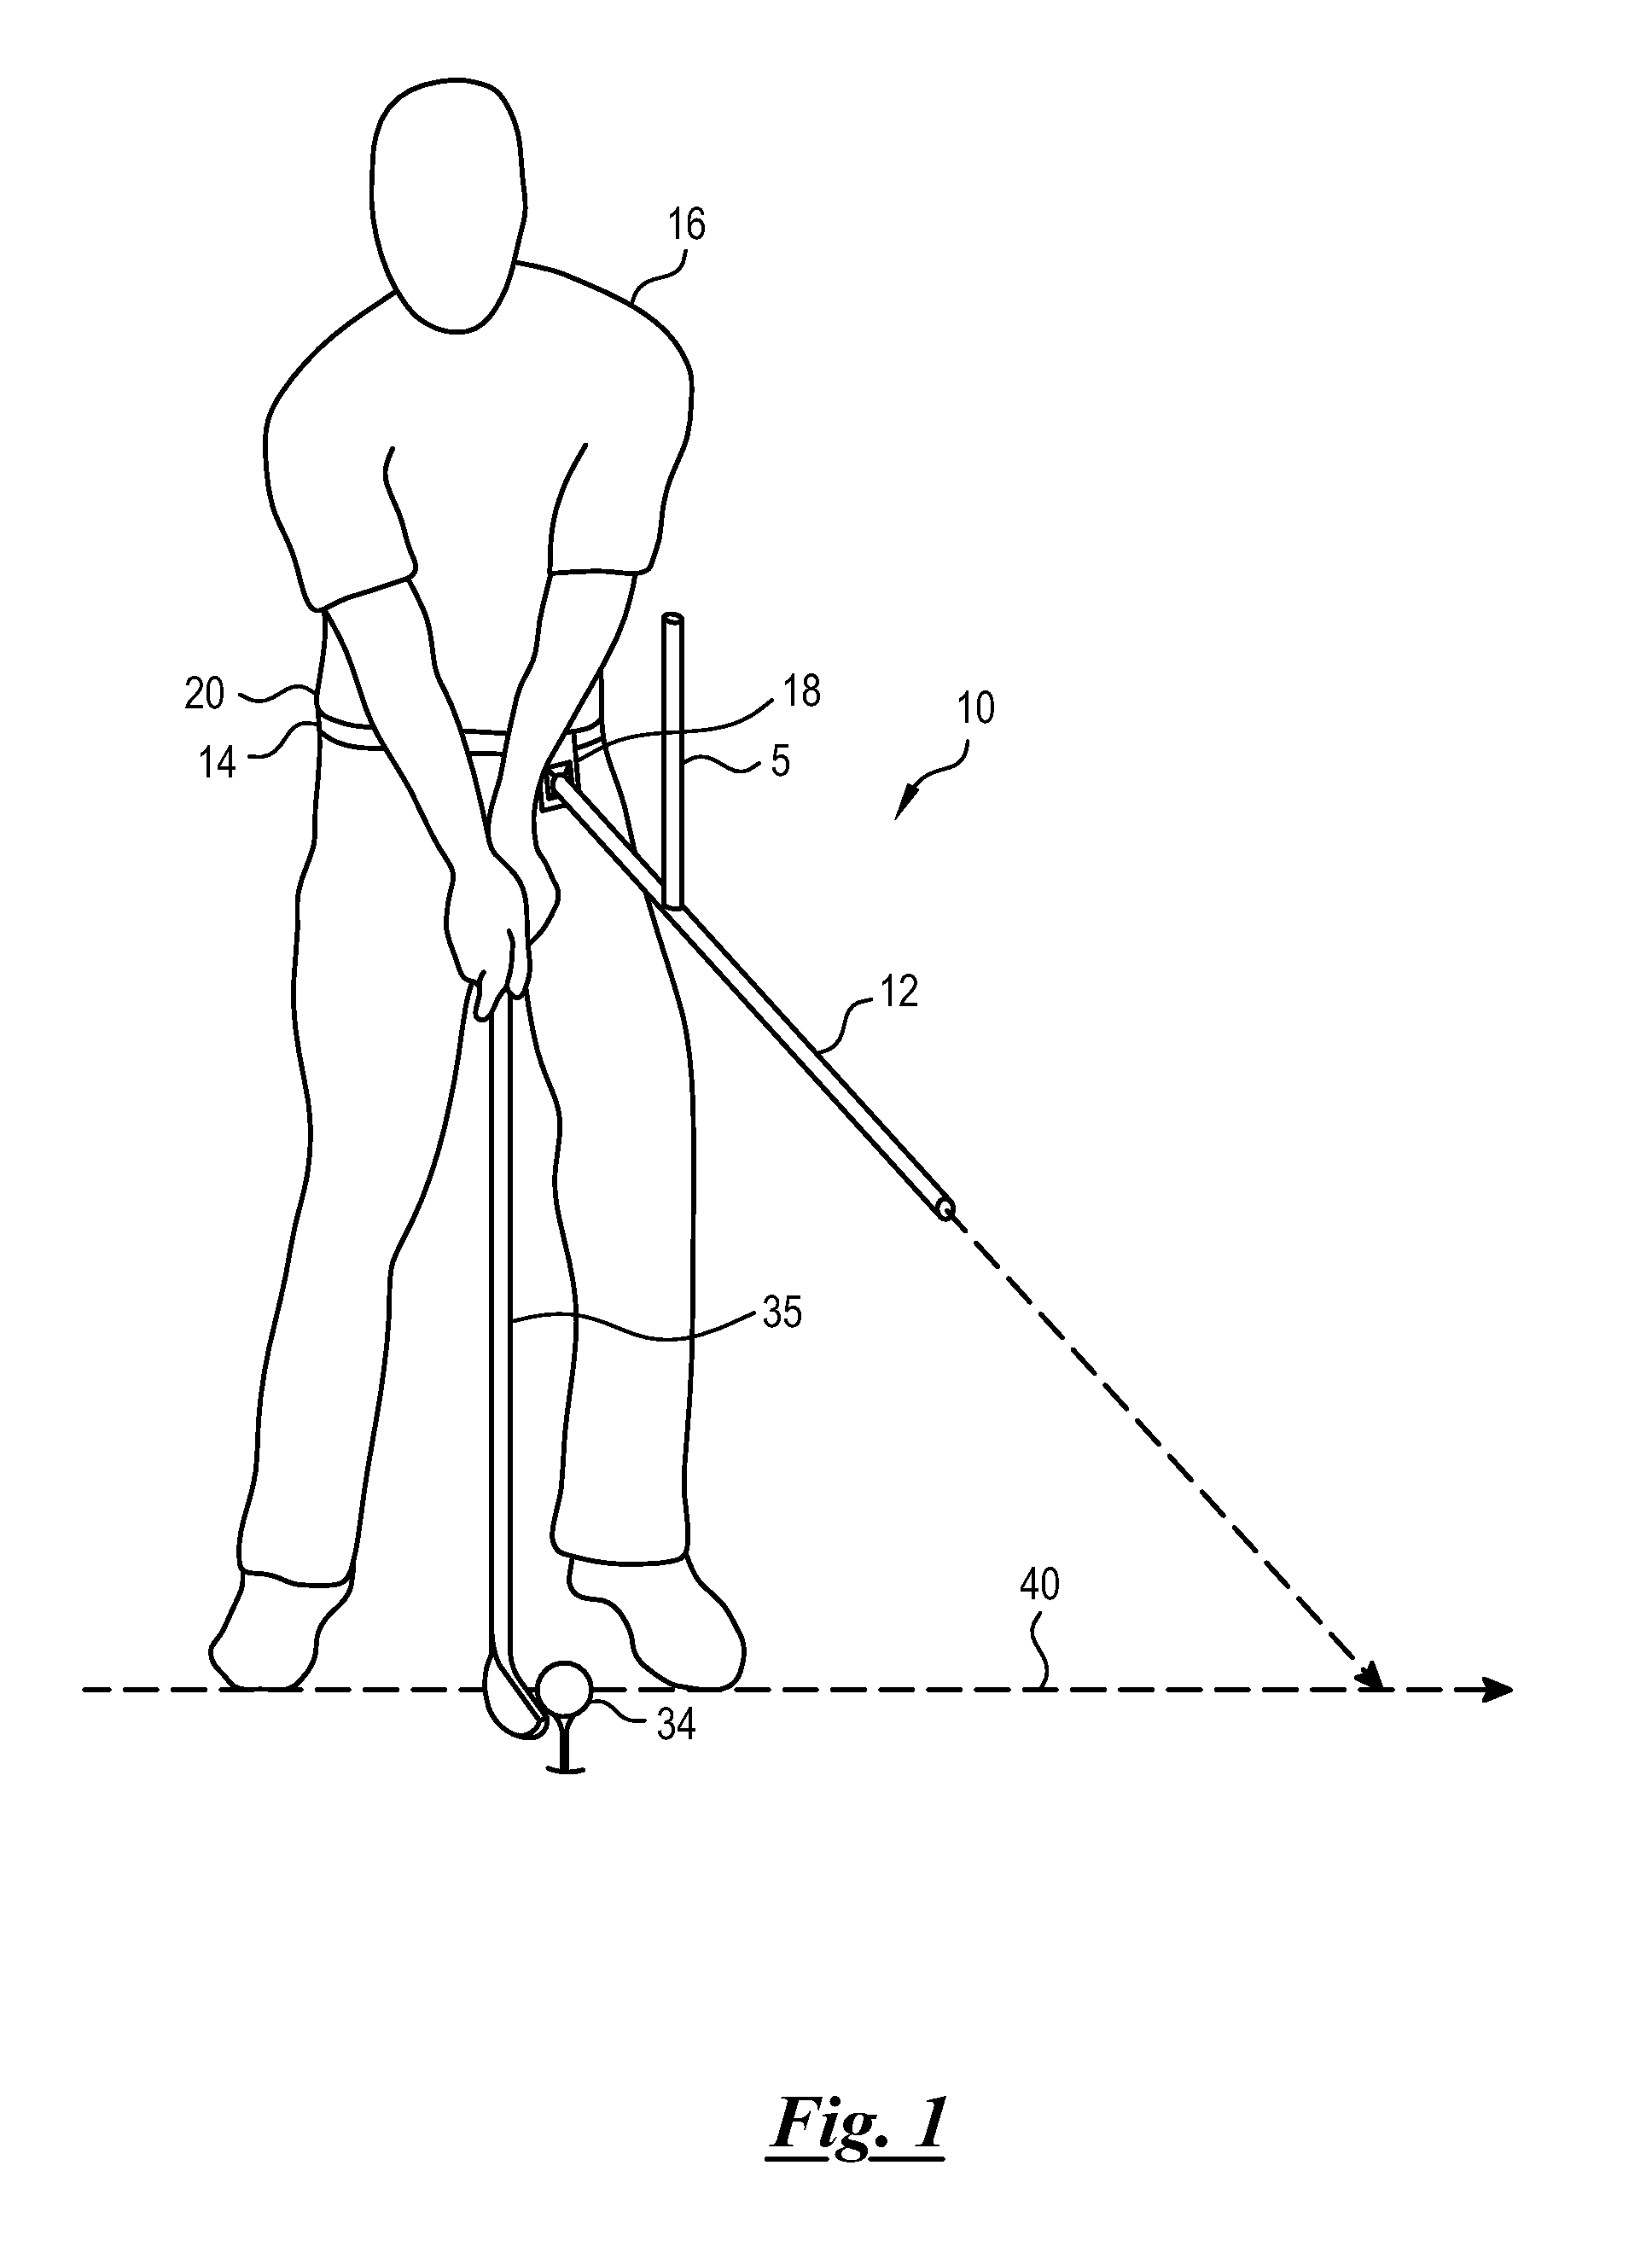 Golf swing training device for correcting arm position and hip rotation sequence